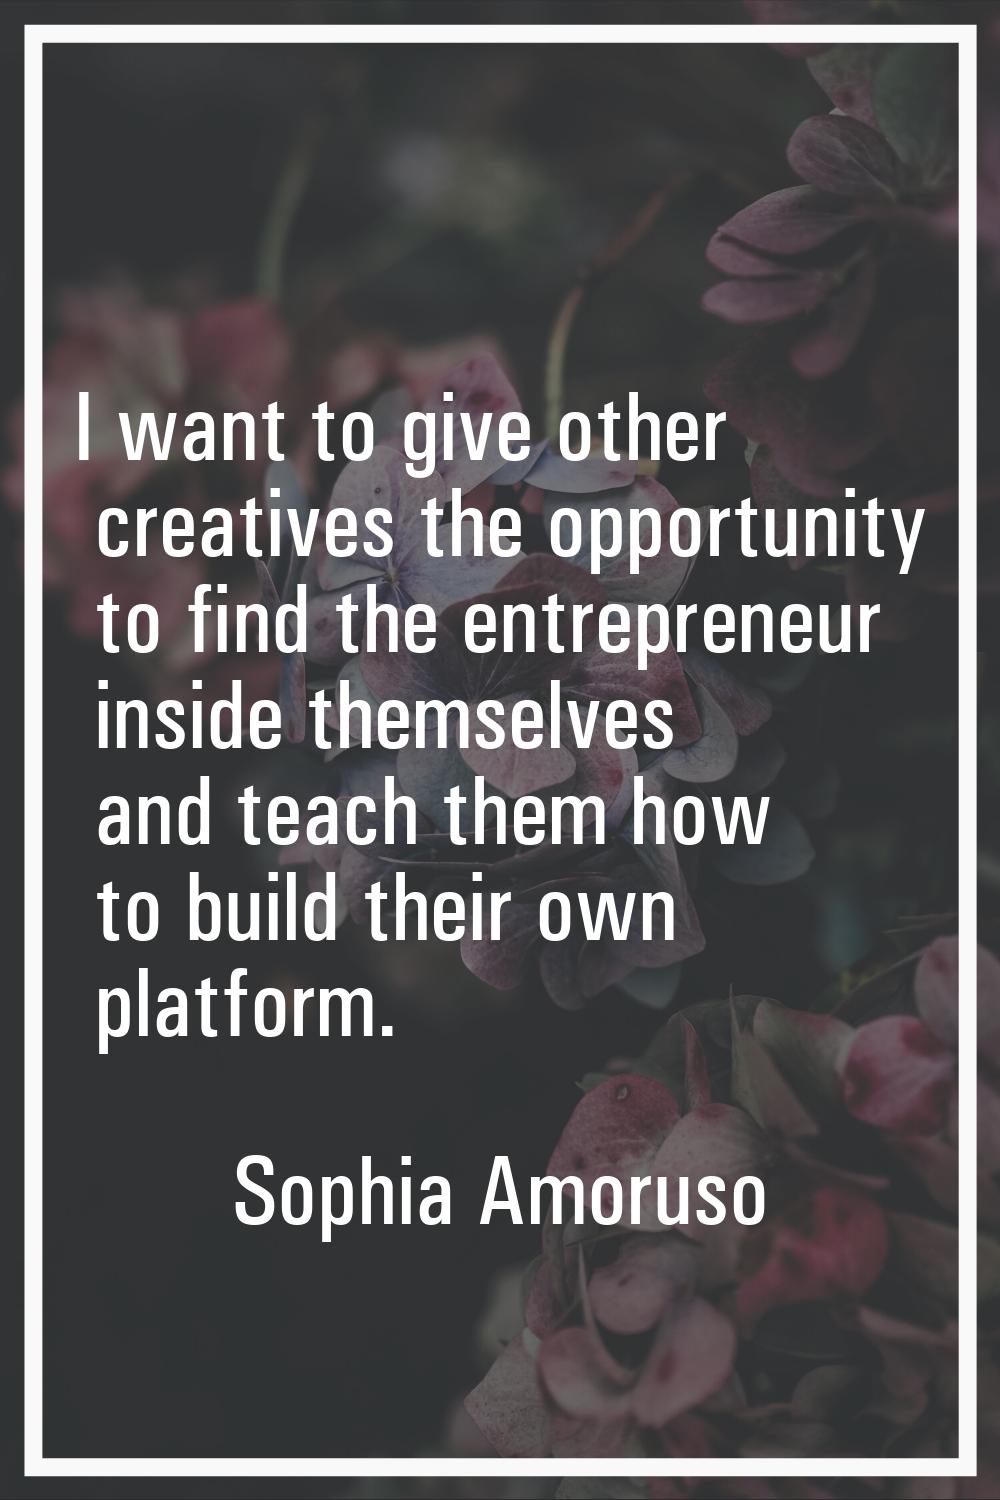 I want to give other creatives the opportunity to find the entrepreneur inside themselves and teach